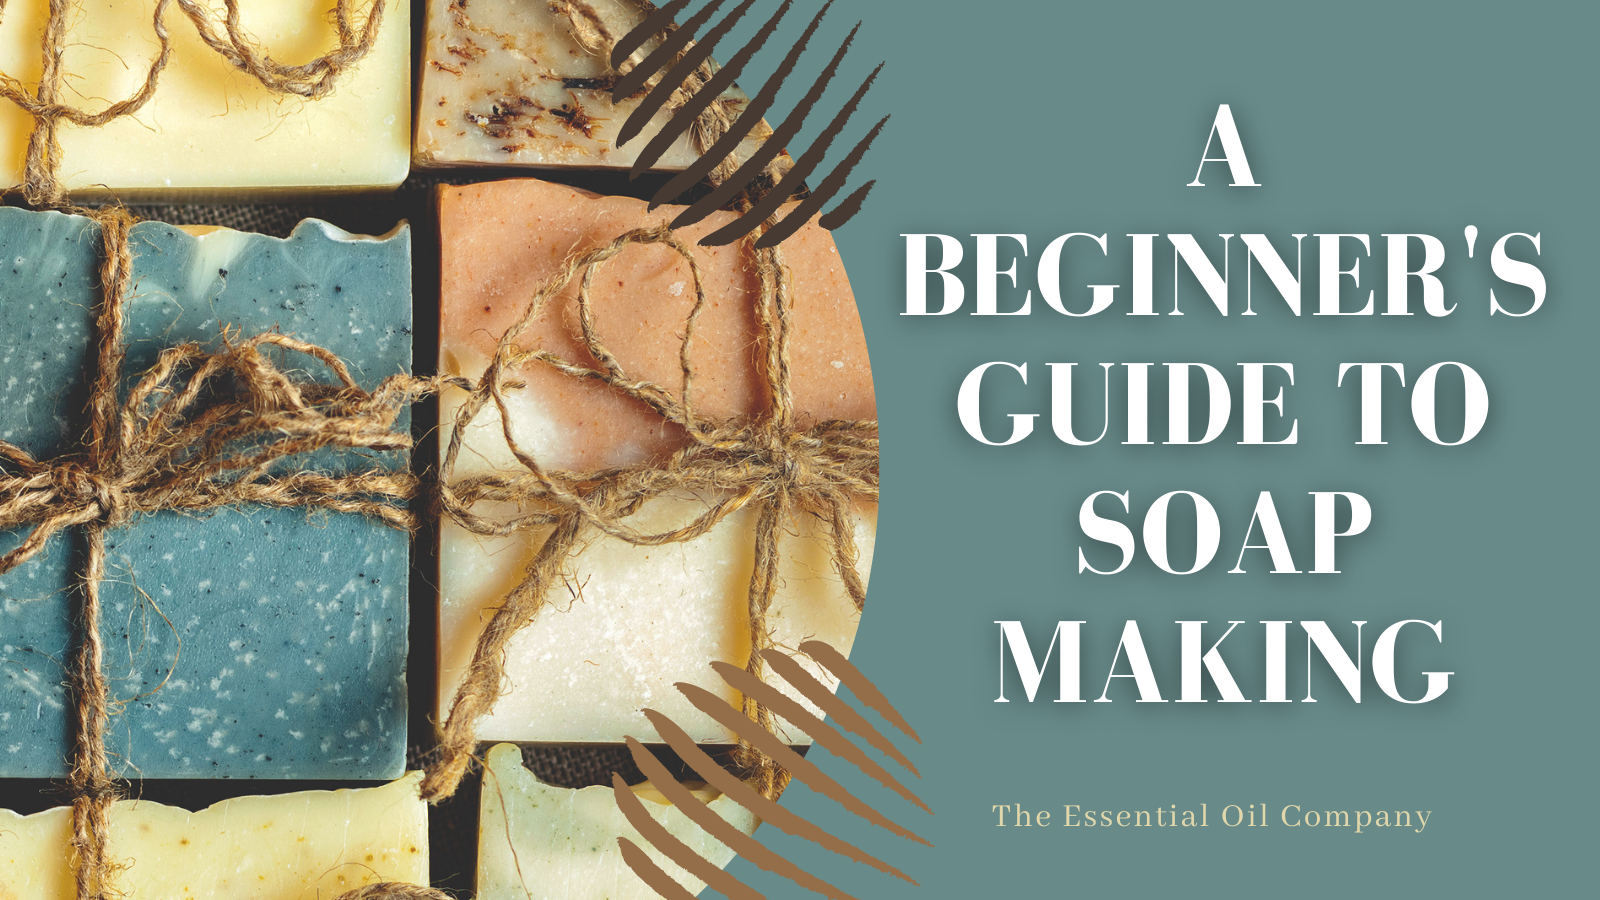 Beginner's Guide to Soap Making essential oils